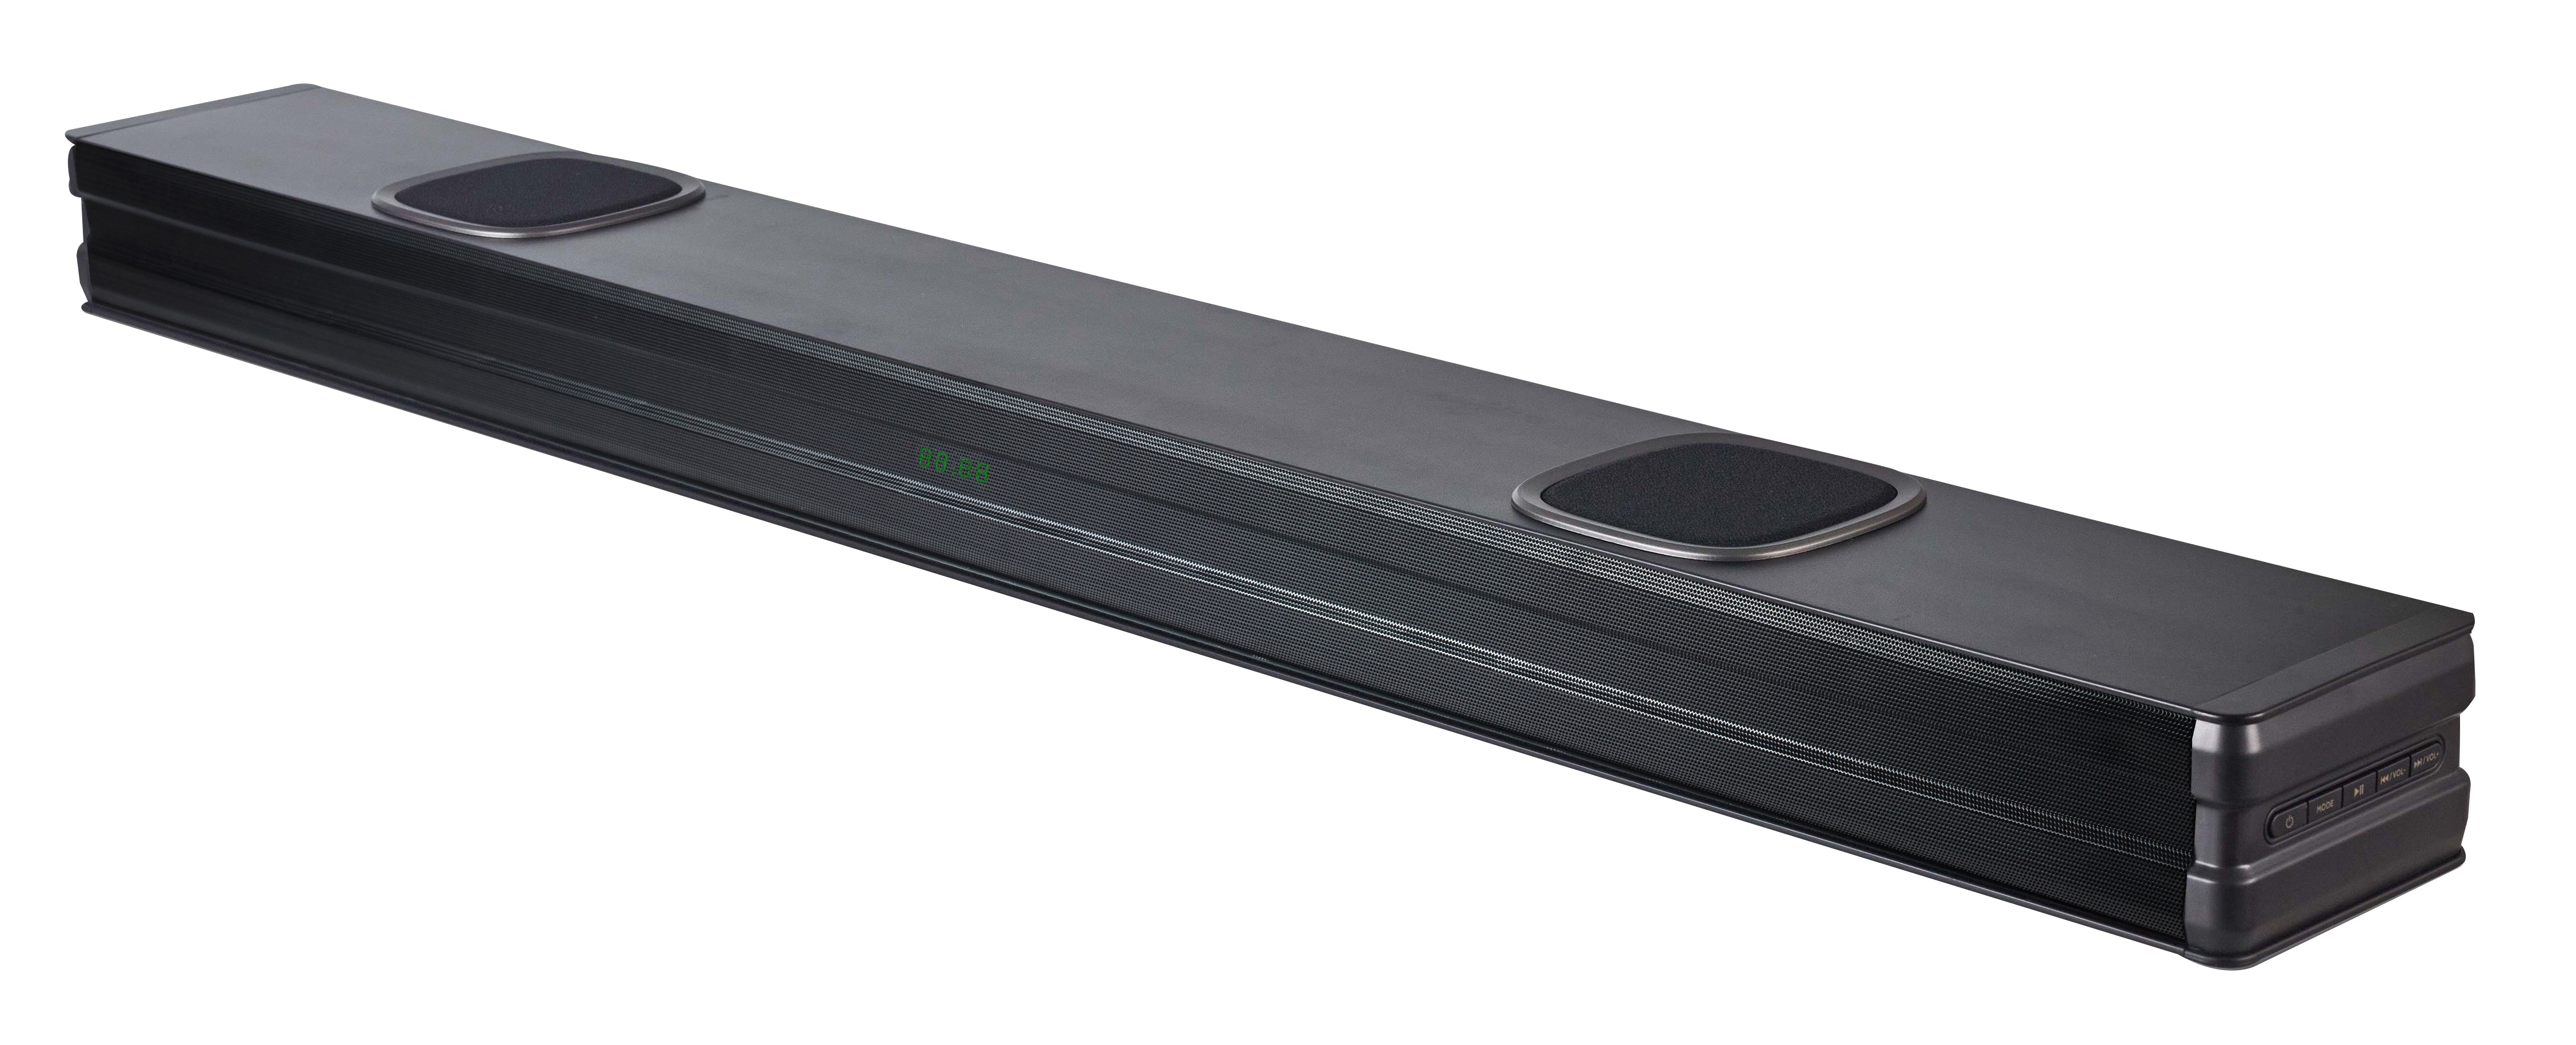 Sonic waves 750 , 2.2Ch soundbar with subwoofer